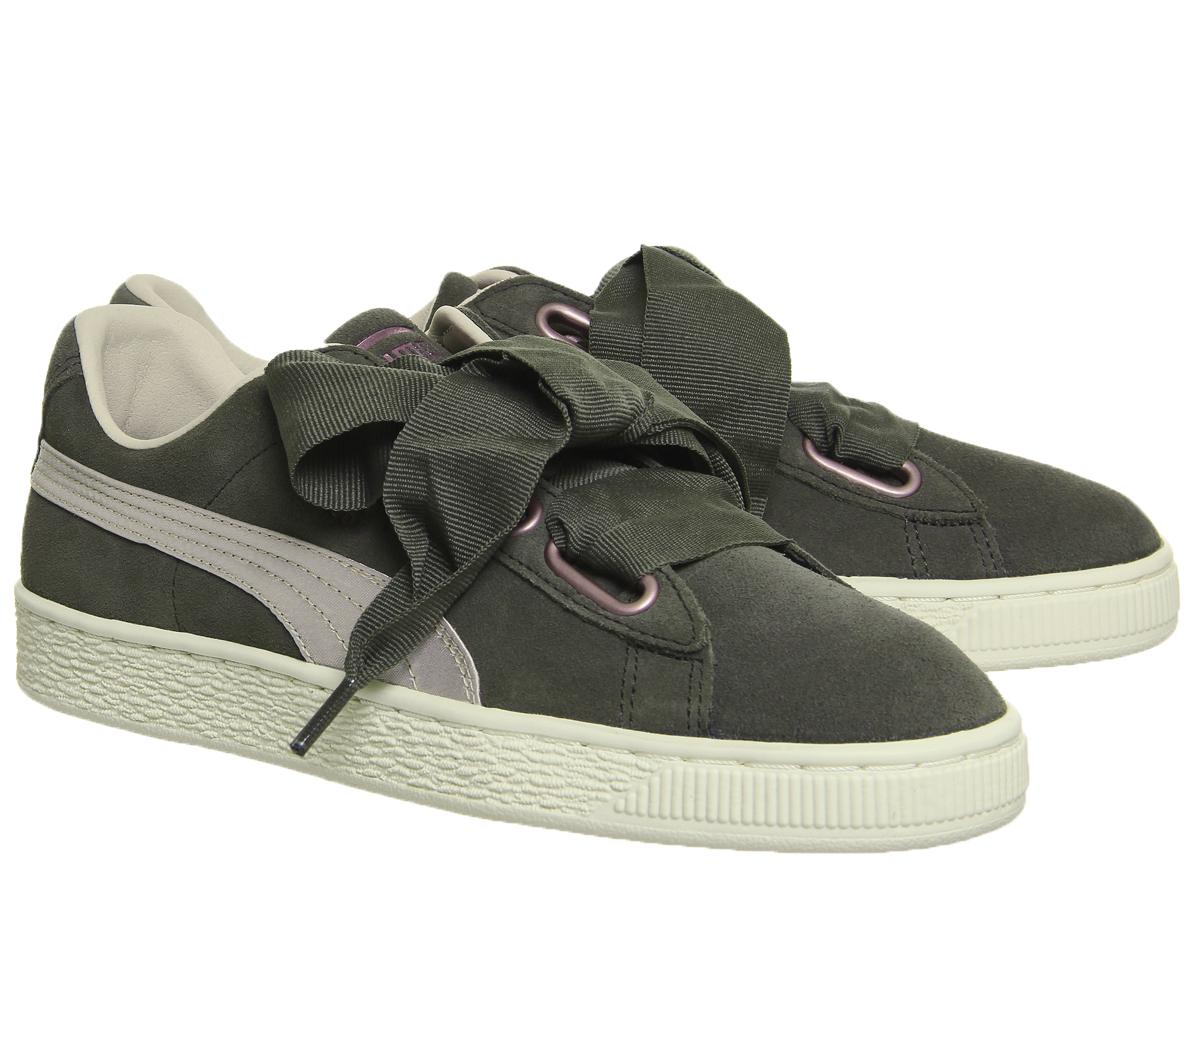 PUMA Suede Heart Trainers Olive Night Pink Tint Rose Gold - Women's ...